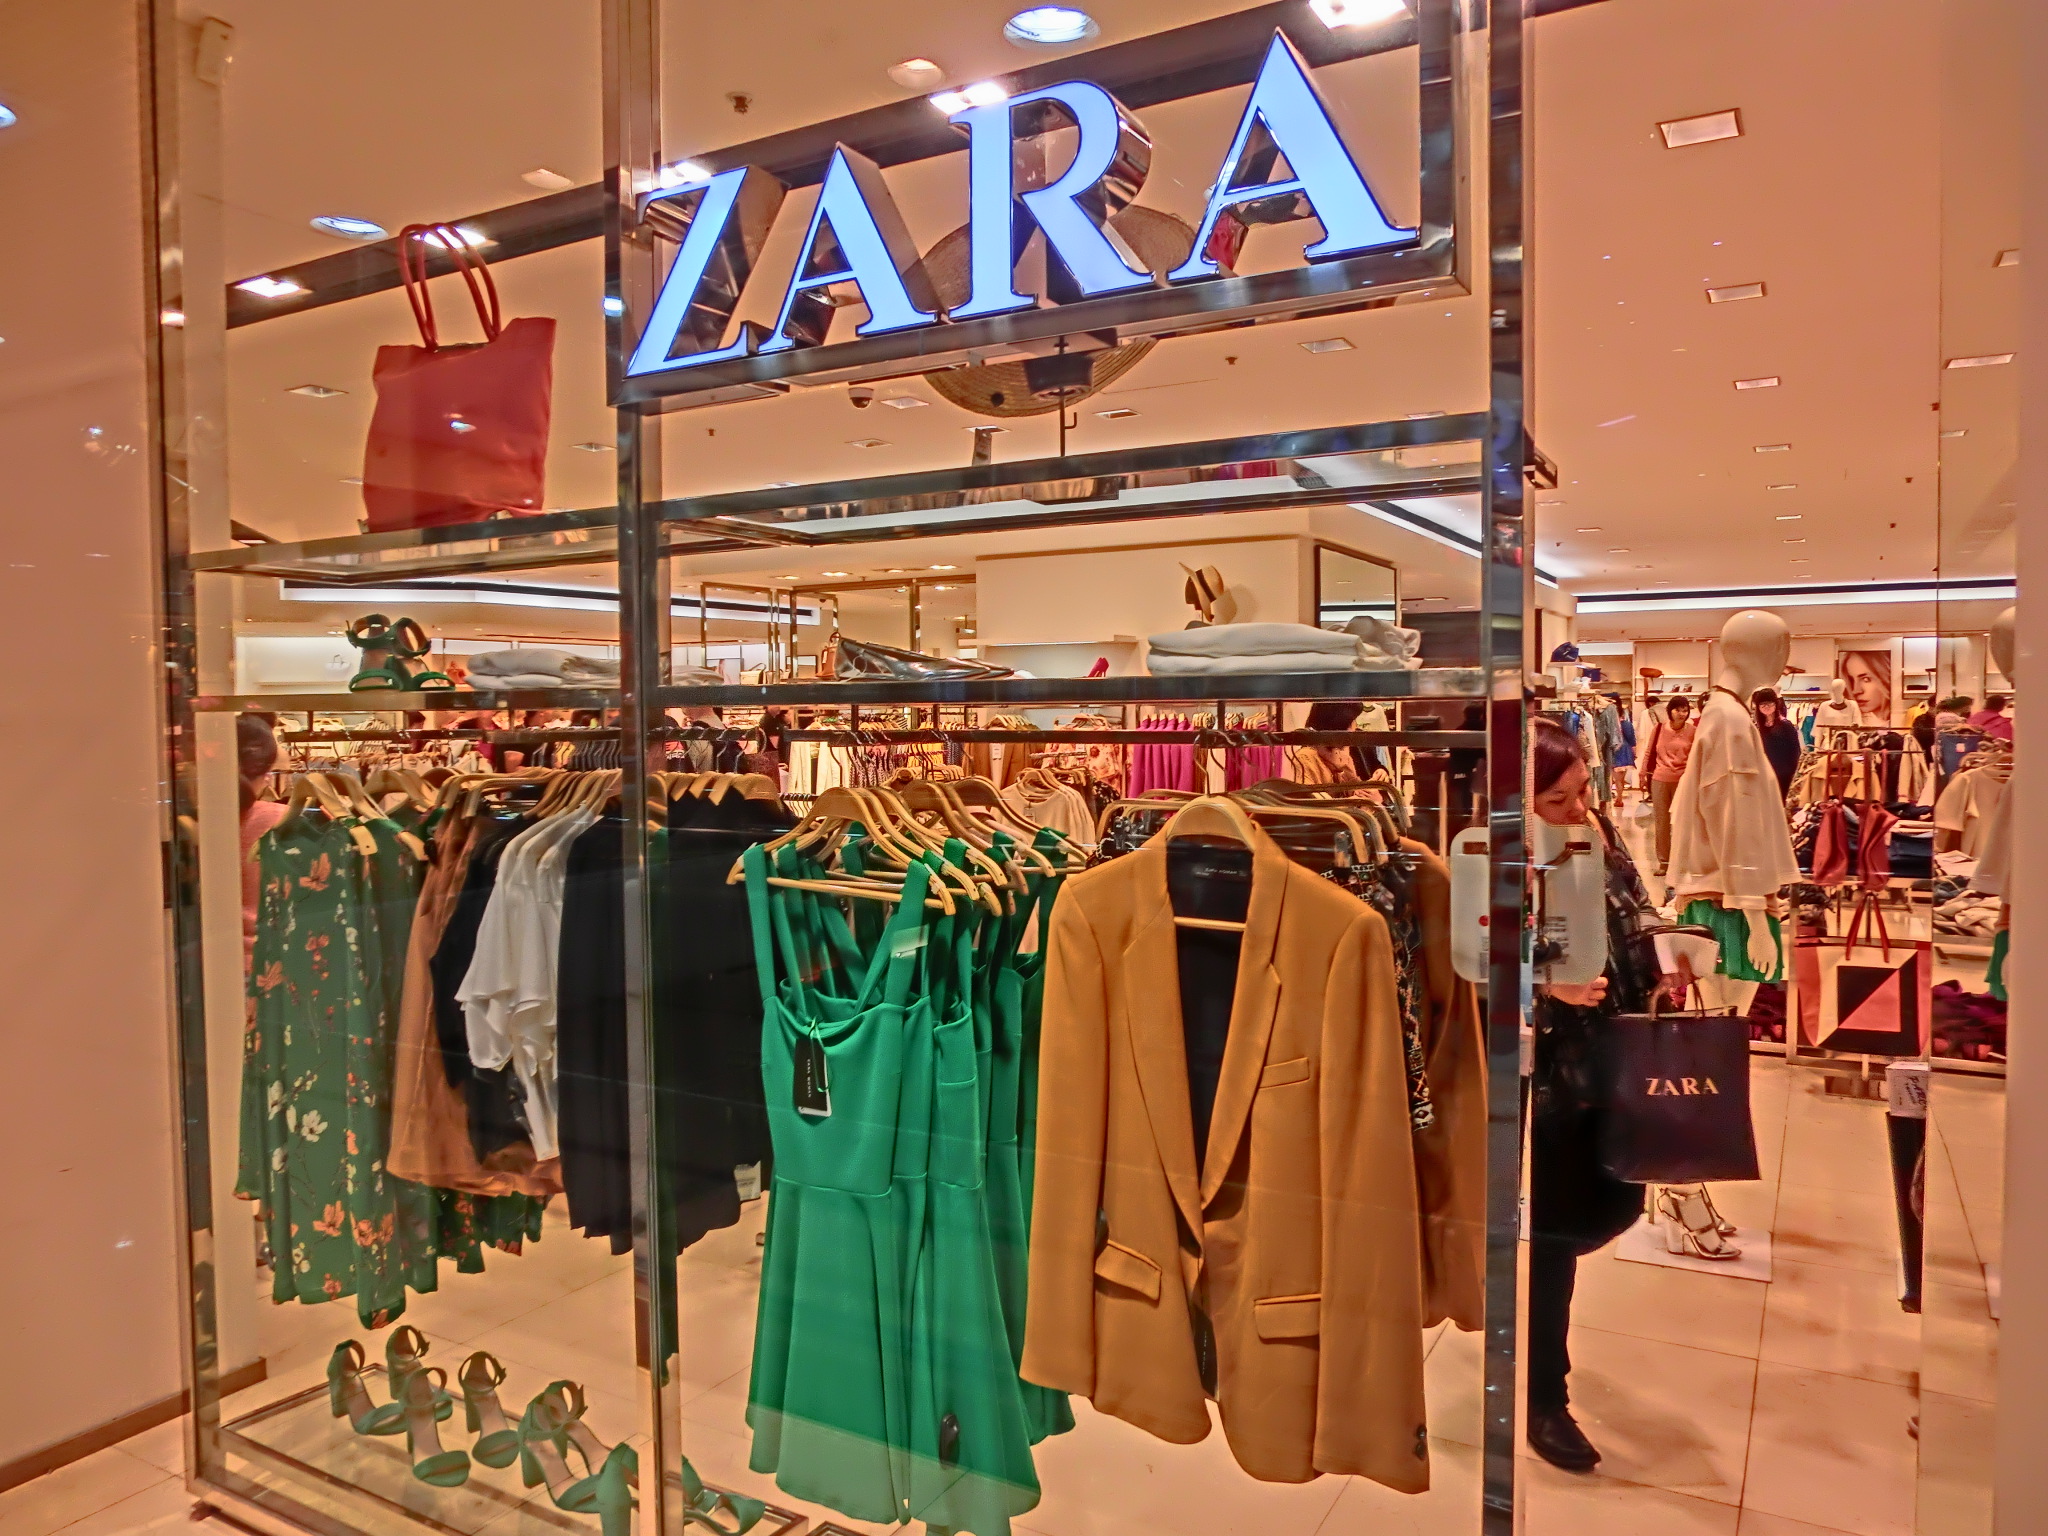 Front of a Zara store